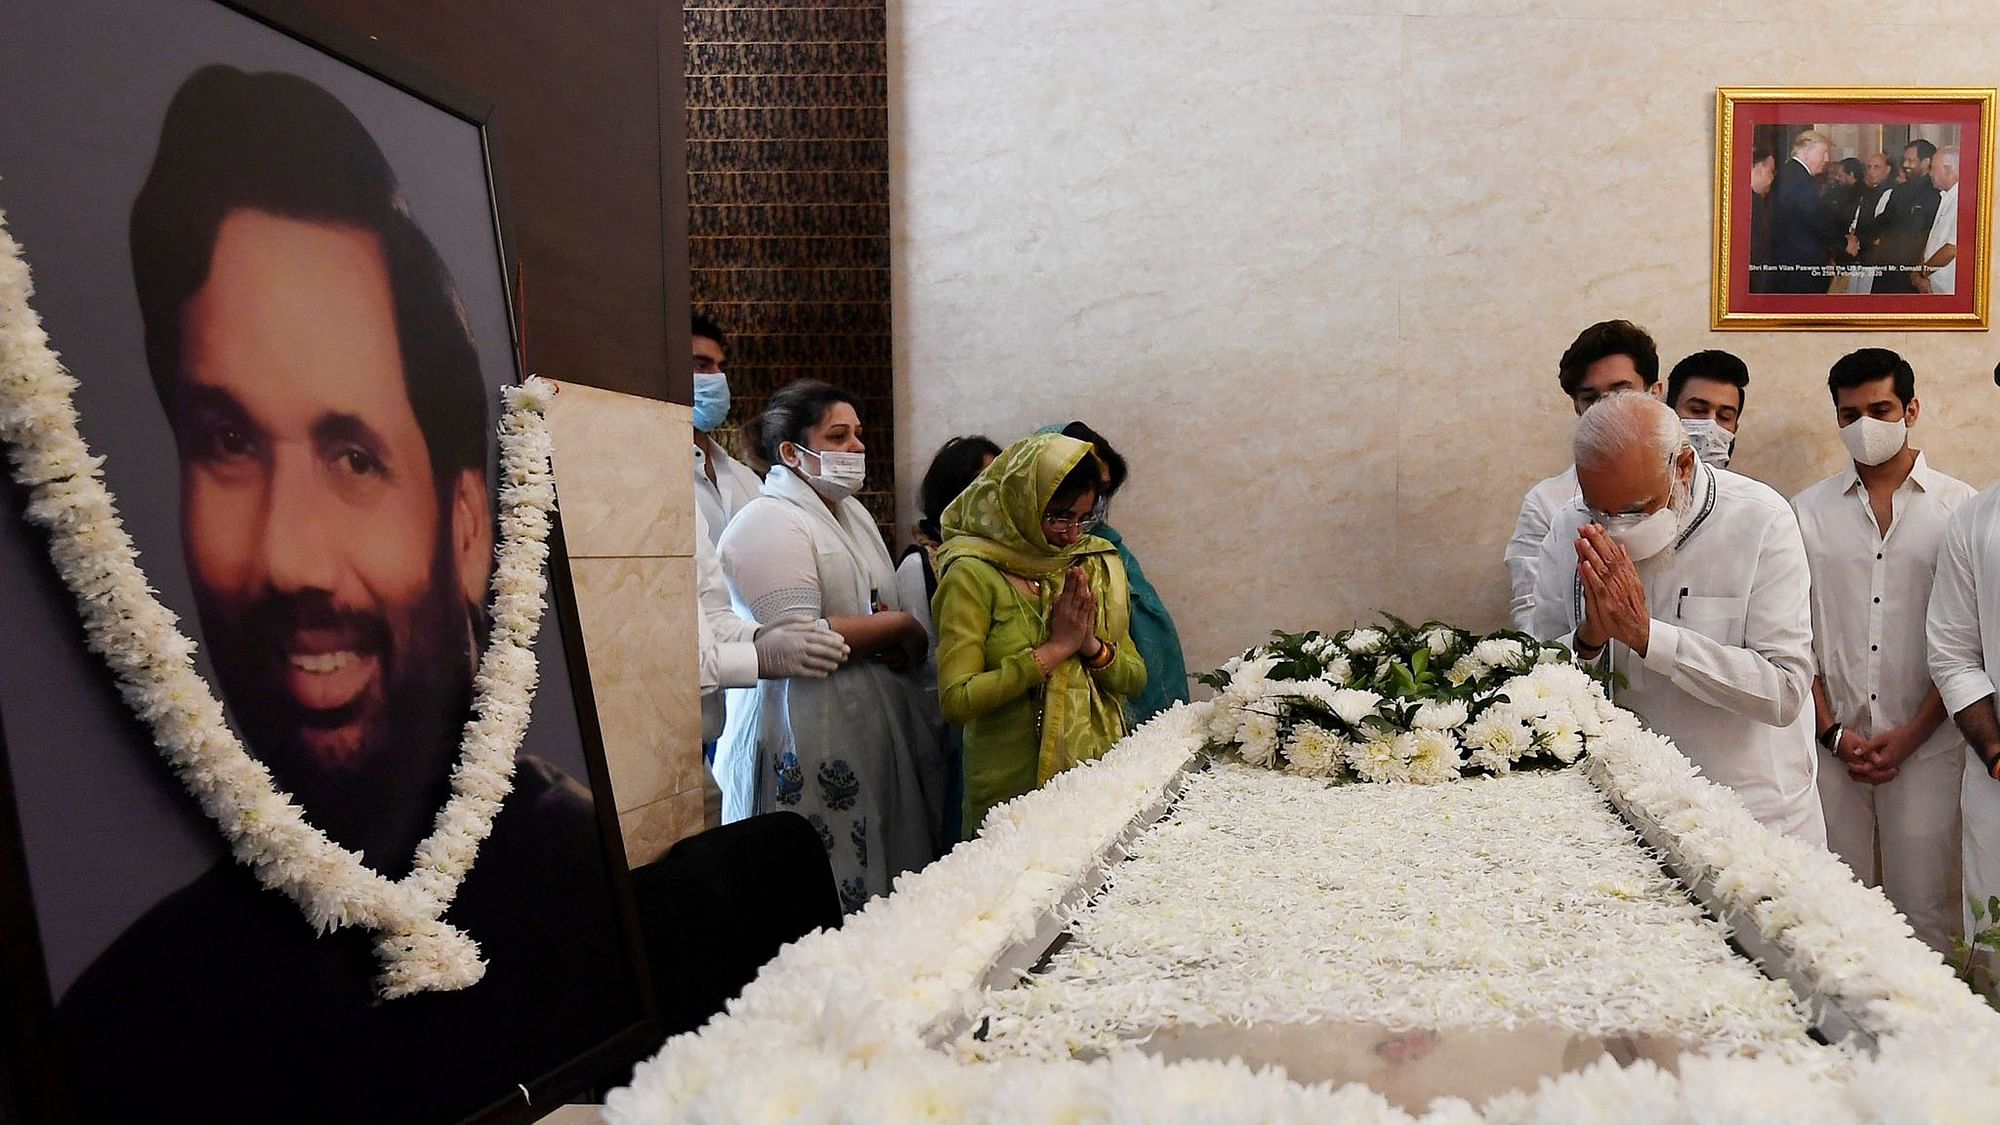 Prime Minister Narendra Modi paid his last respects to Union Minister and LJP leader Ram Vilas Paswan at his residence in Delhi on Friday, 9 October.